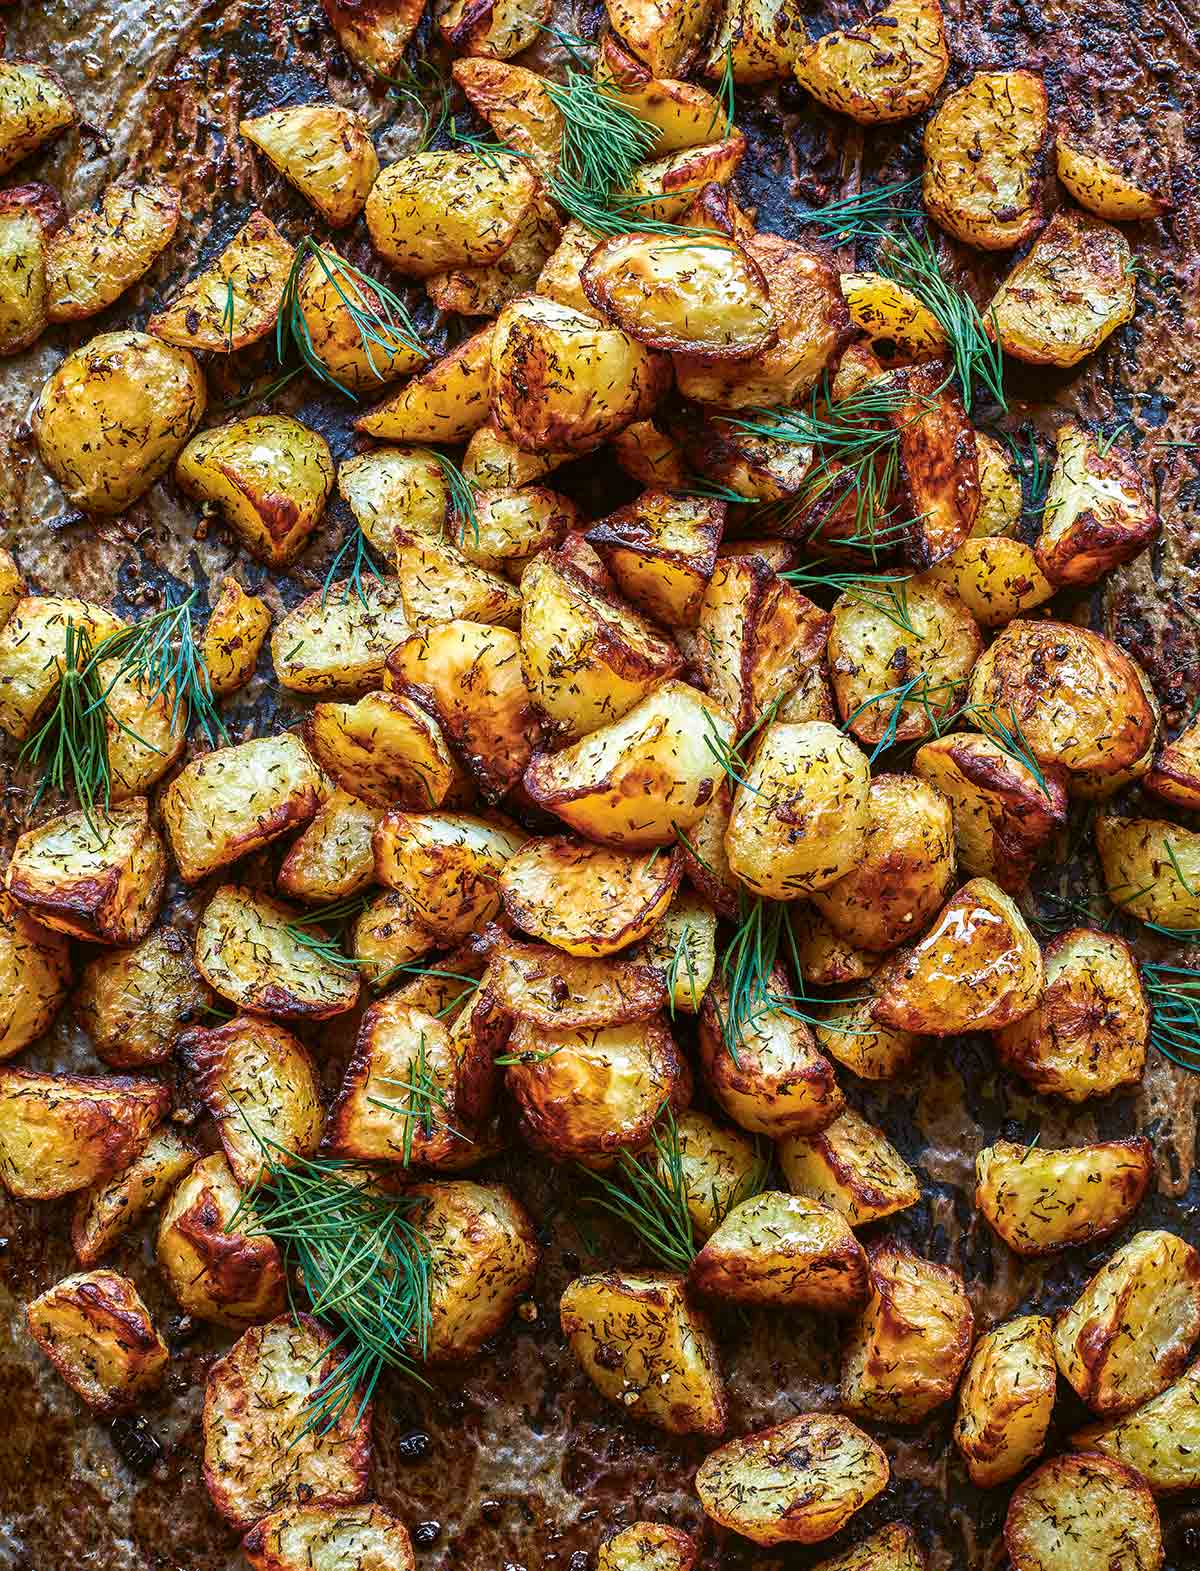 Roasted potatoes topped with dill on a baking sheet.